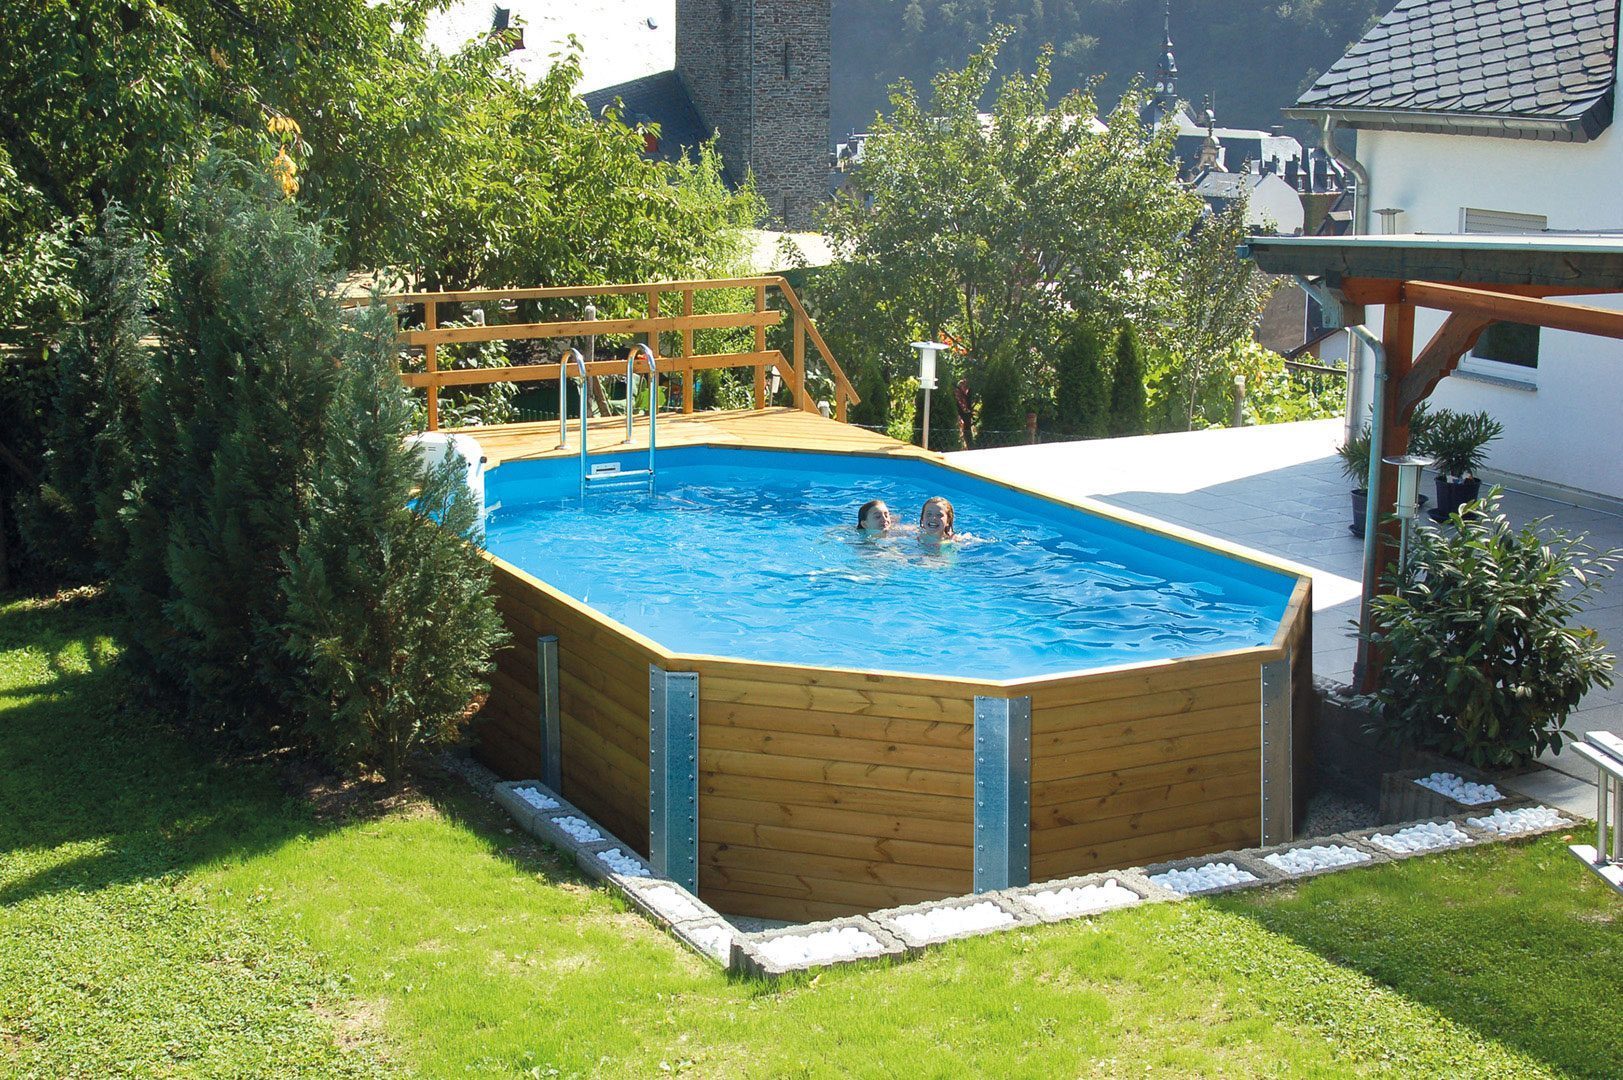 Solid wood pool by Weka. Large Weka swimming pool in the garden in front of a white house. The pool is filled with two children.